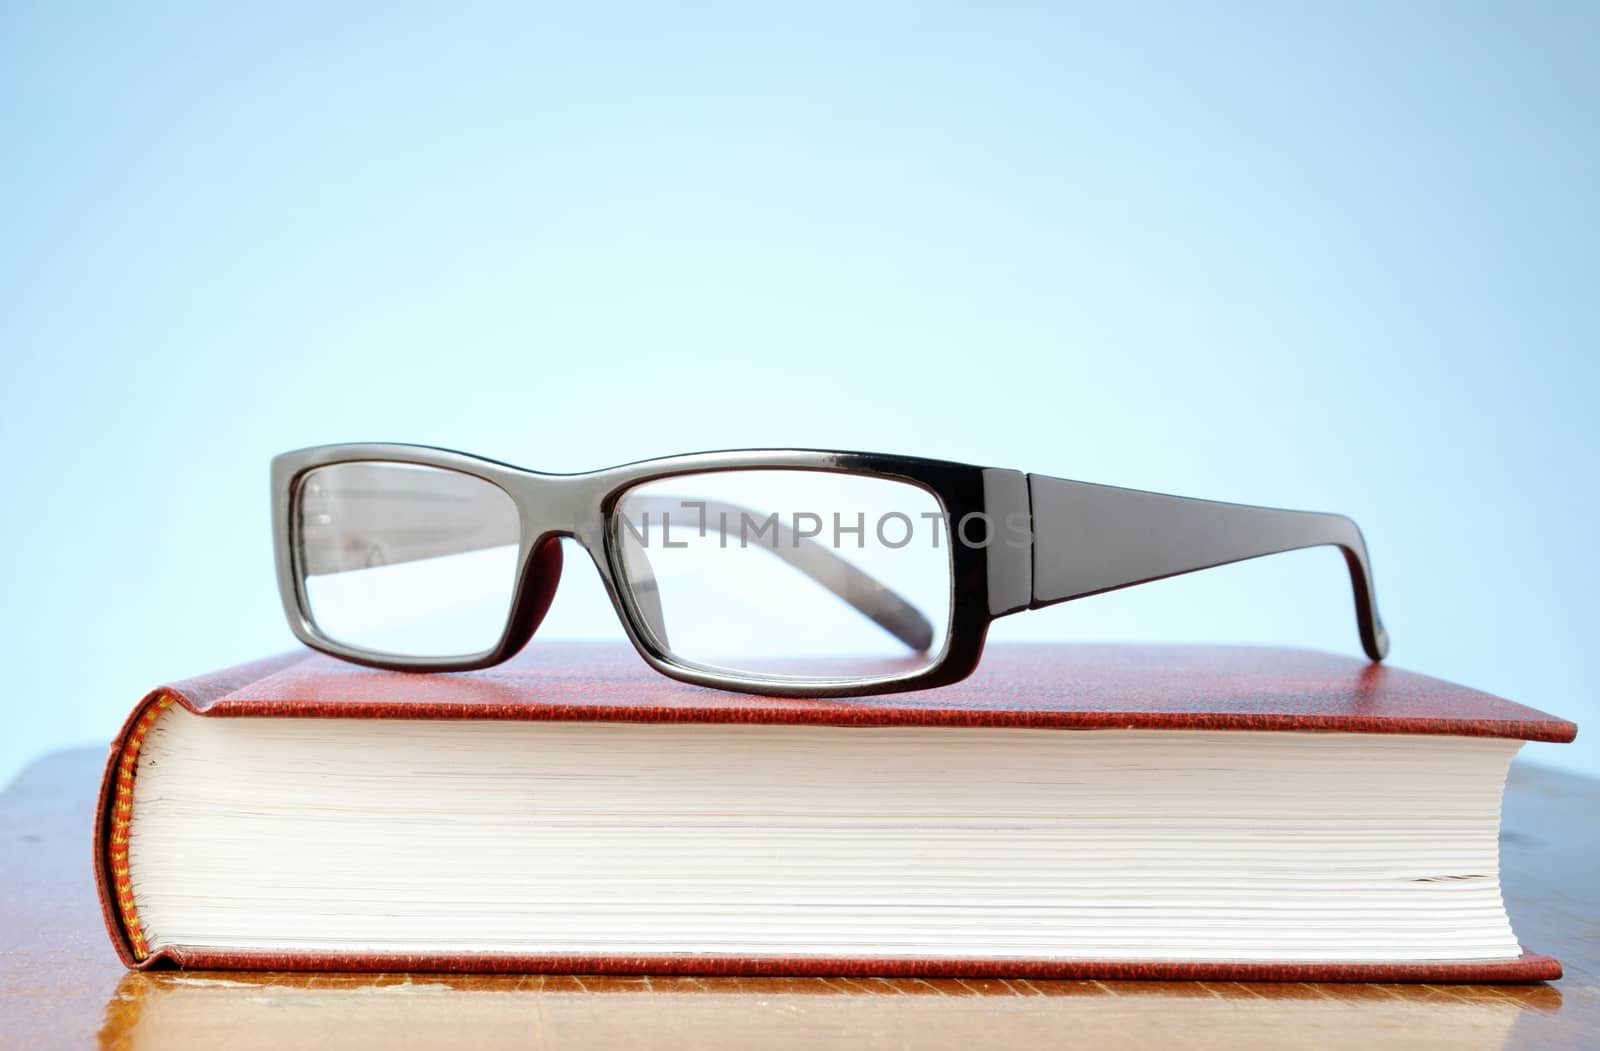 black-rimmed glasses and a book on the table